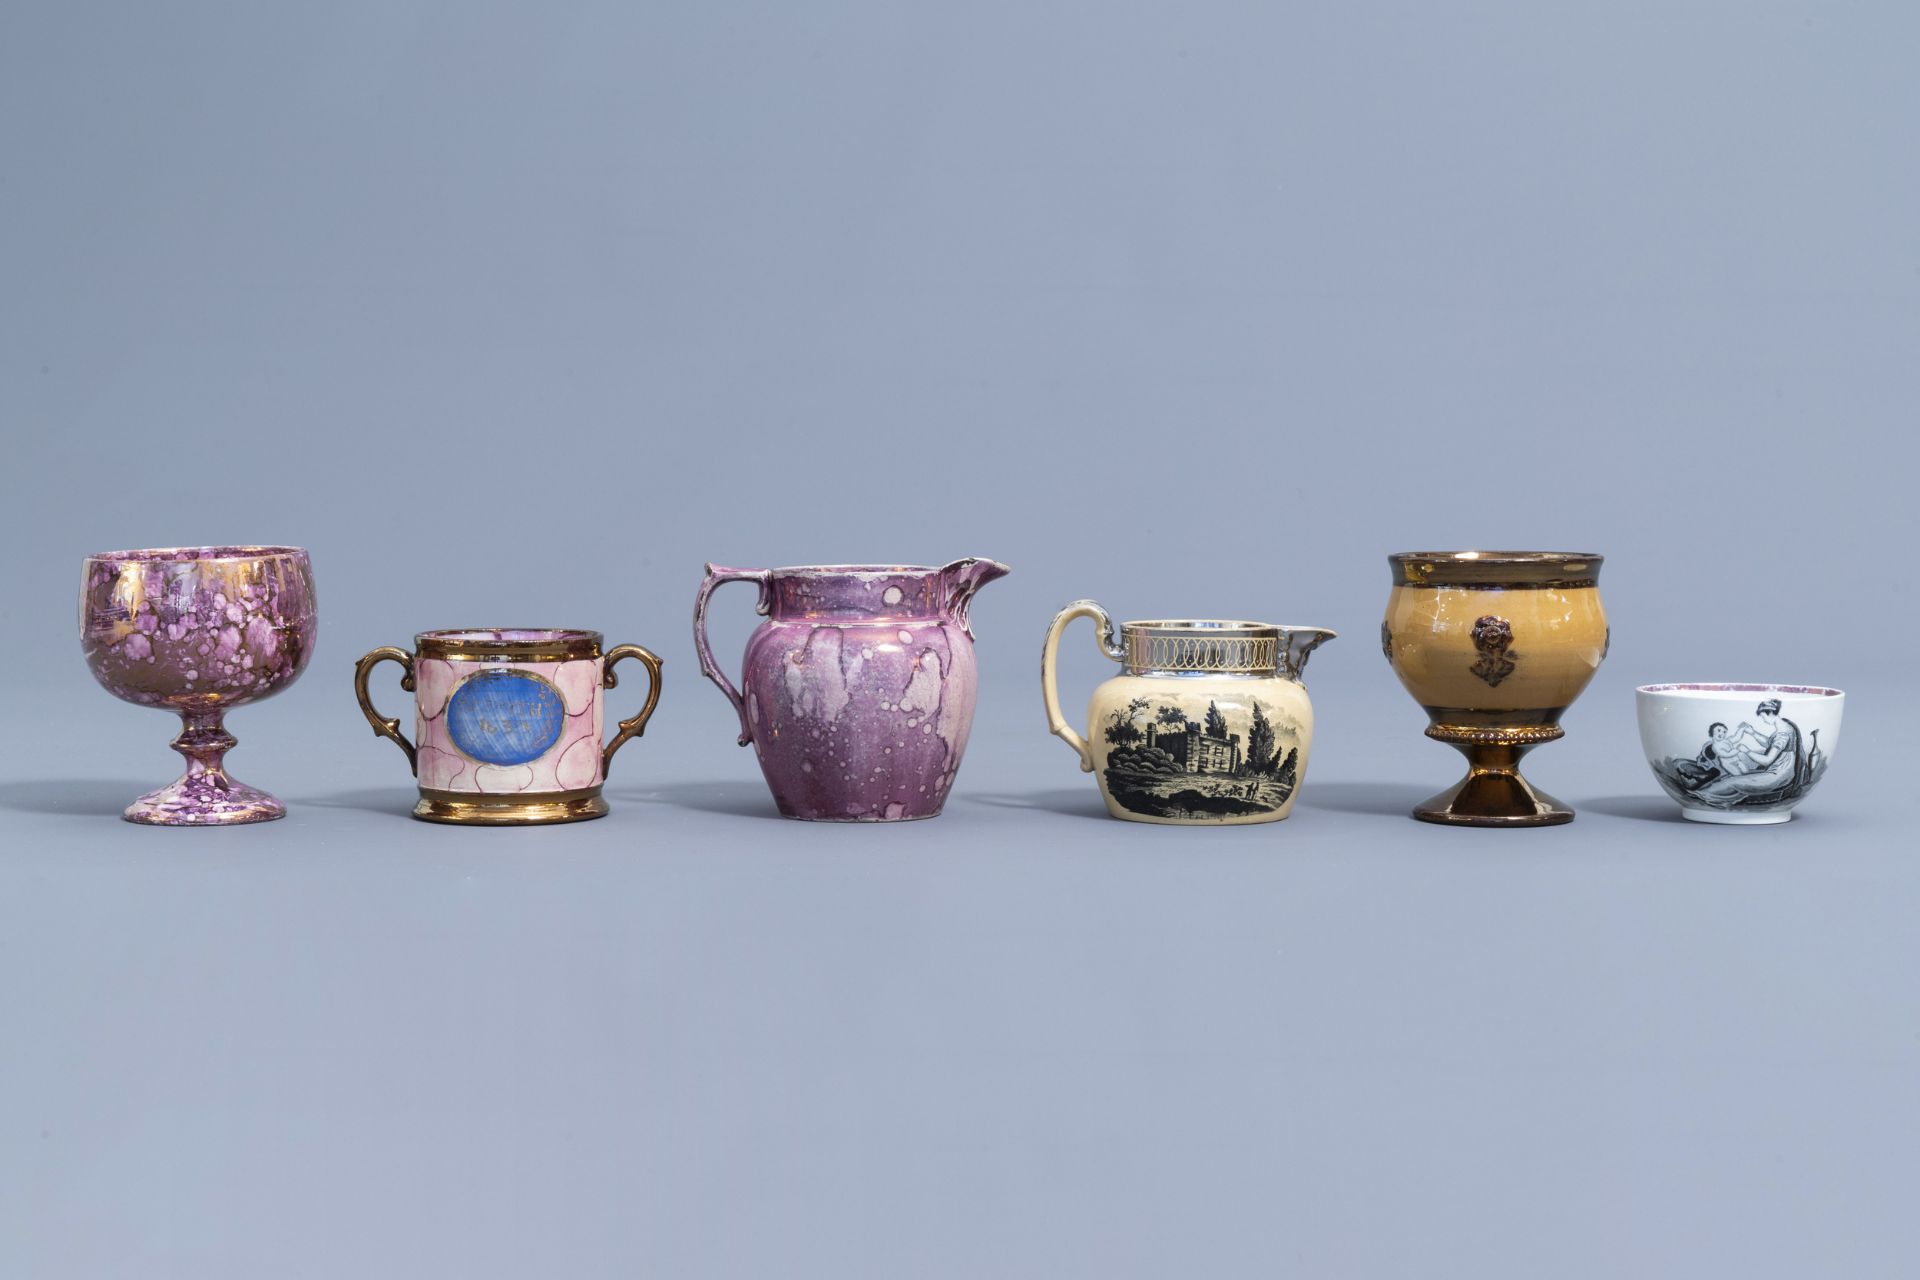 A varied collection of English lustreware items, 19th C. - Image 19 of 42